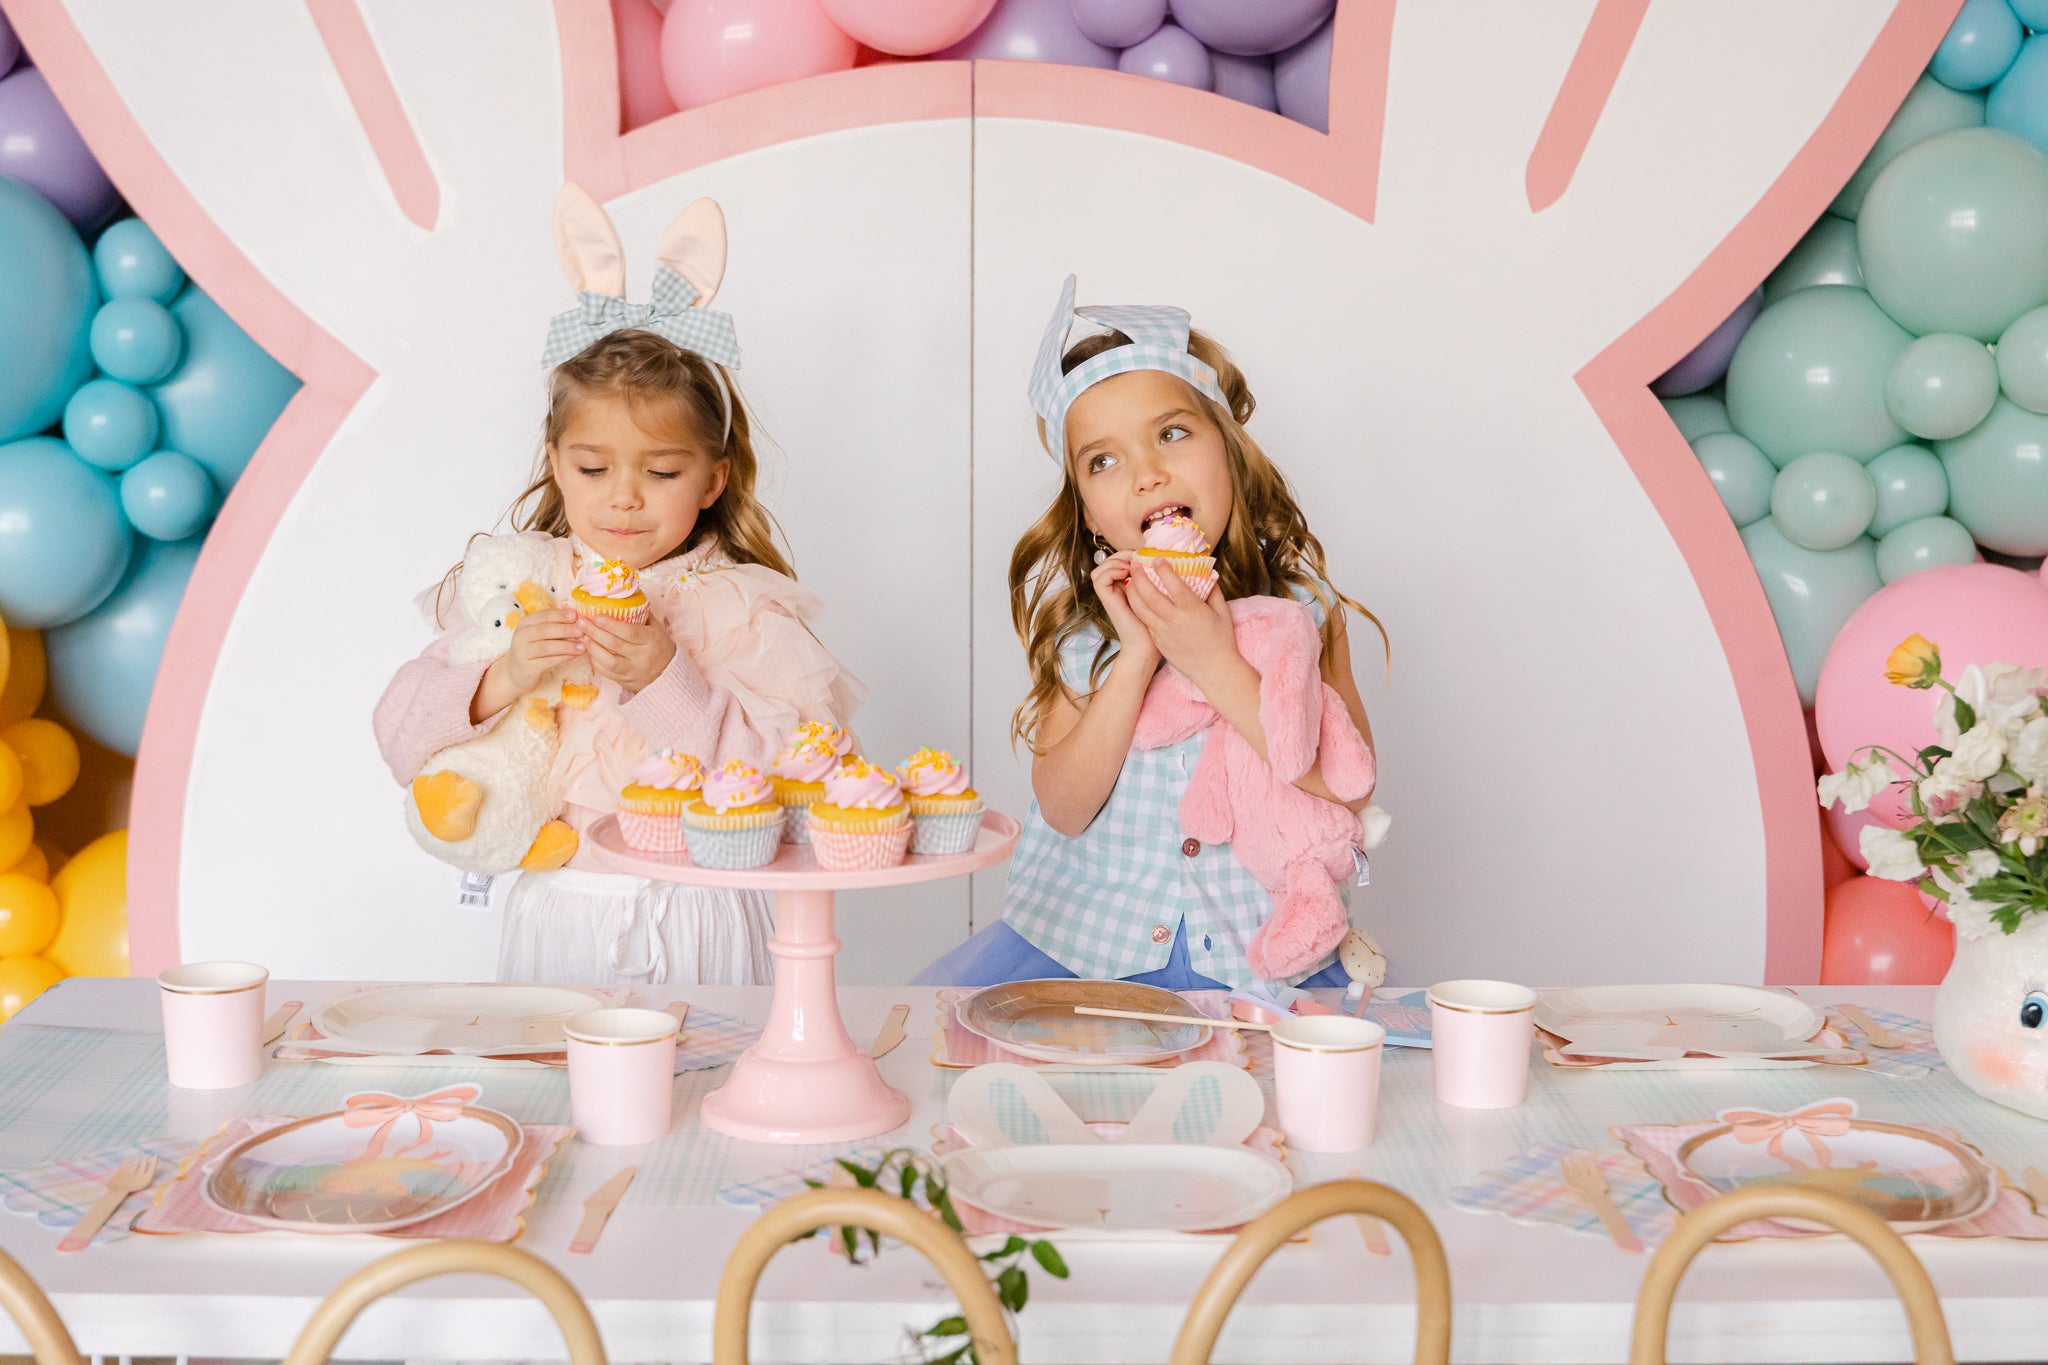 Fun Easter party ideas for kids and families at Bonjour Fête.